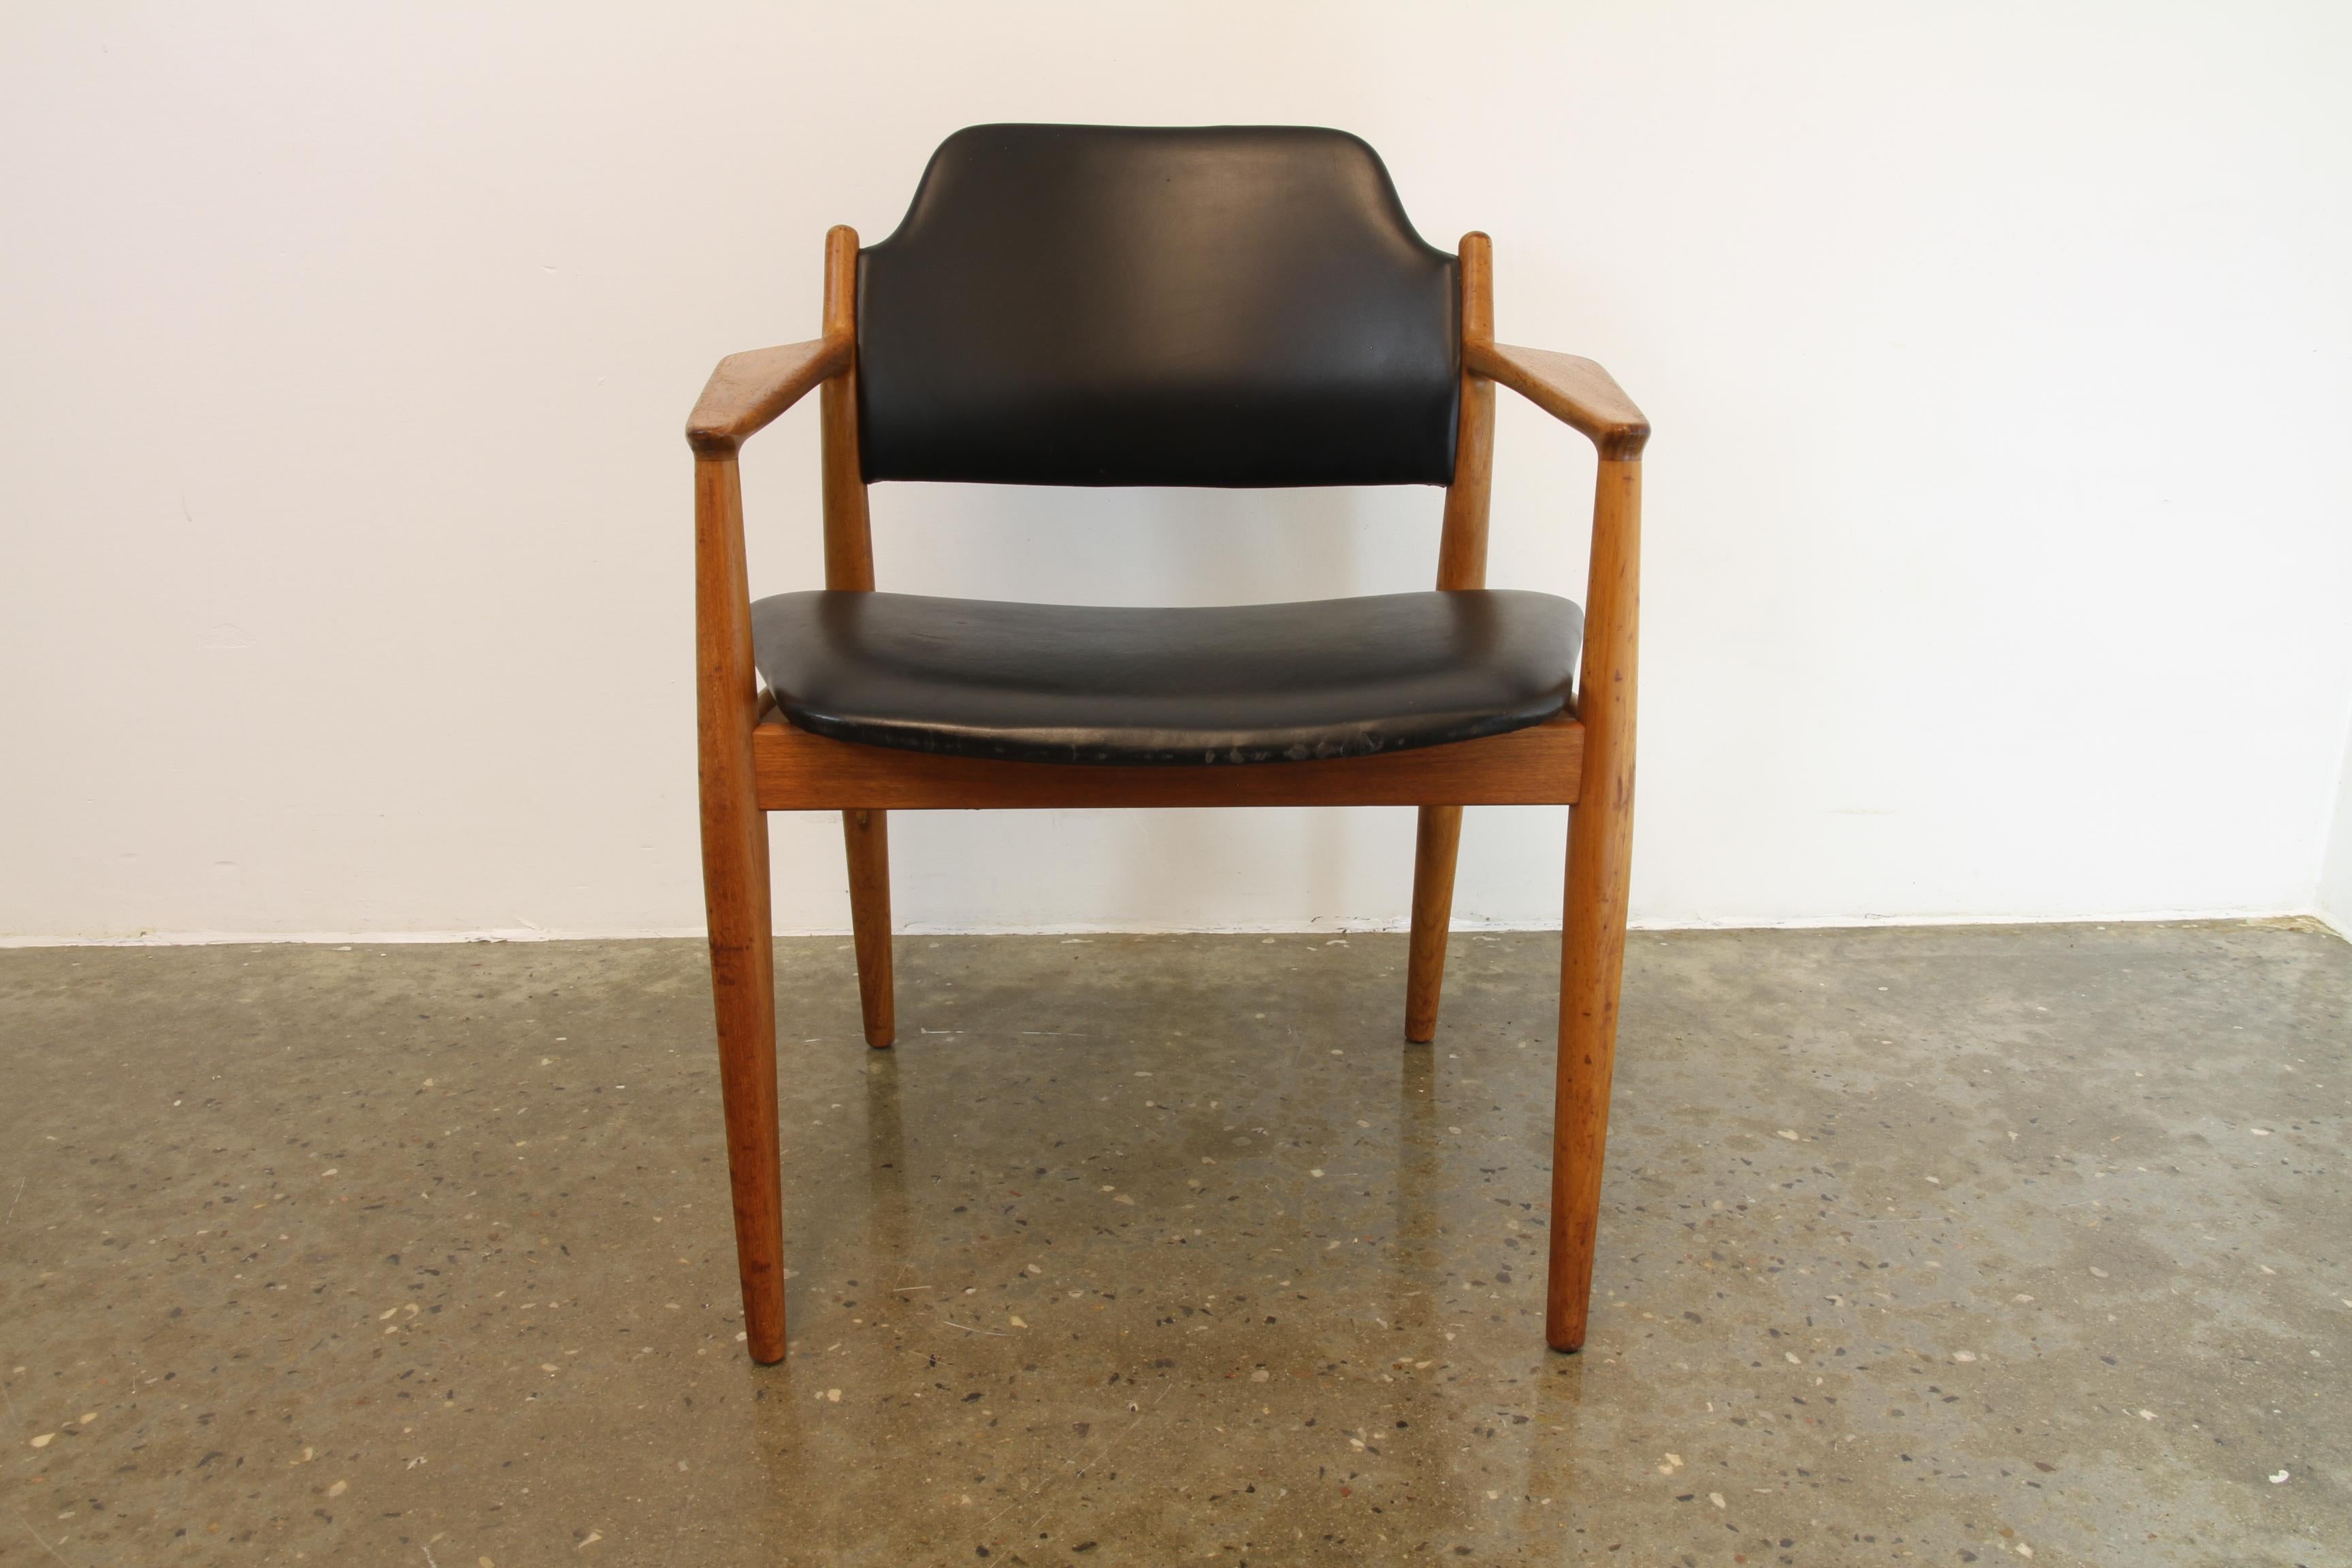 Danish teak armchair by Arne Vodder for Sibast Furniture, 1960s. Beautiful sculpted armchair with the original leather upholstery. Excellent comfort. Great vintage piece.